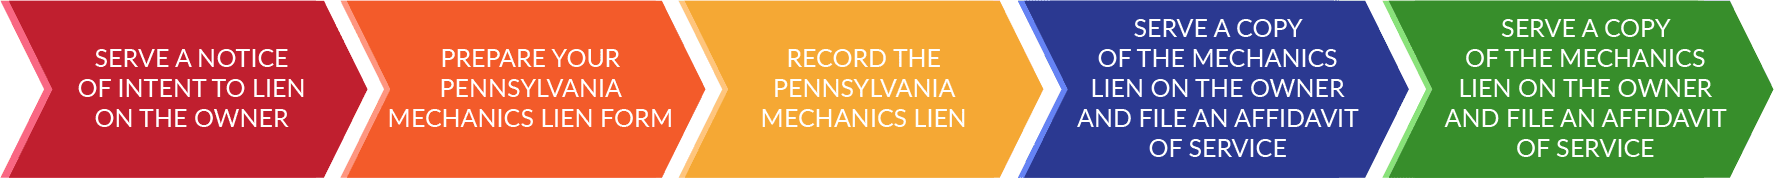 How to file a mechanics lien in Pennsylvania